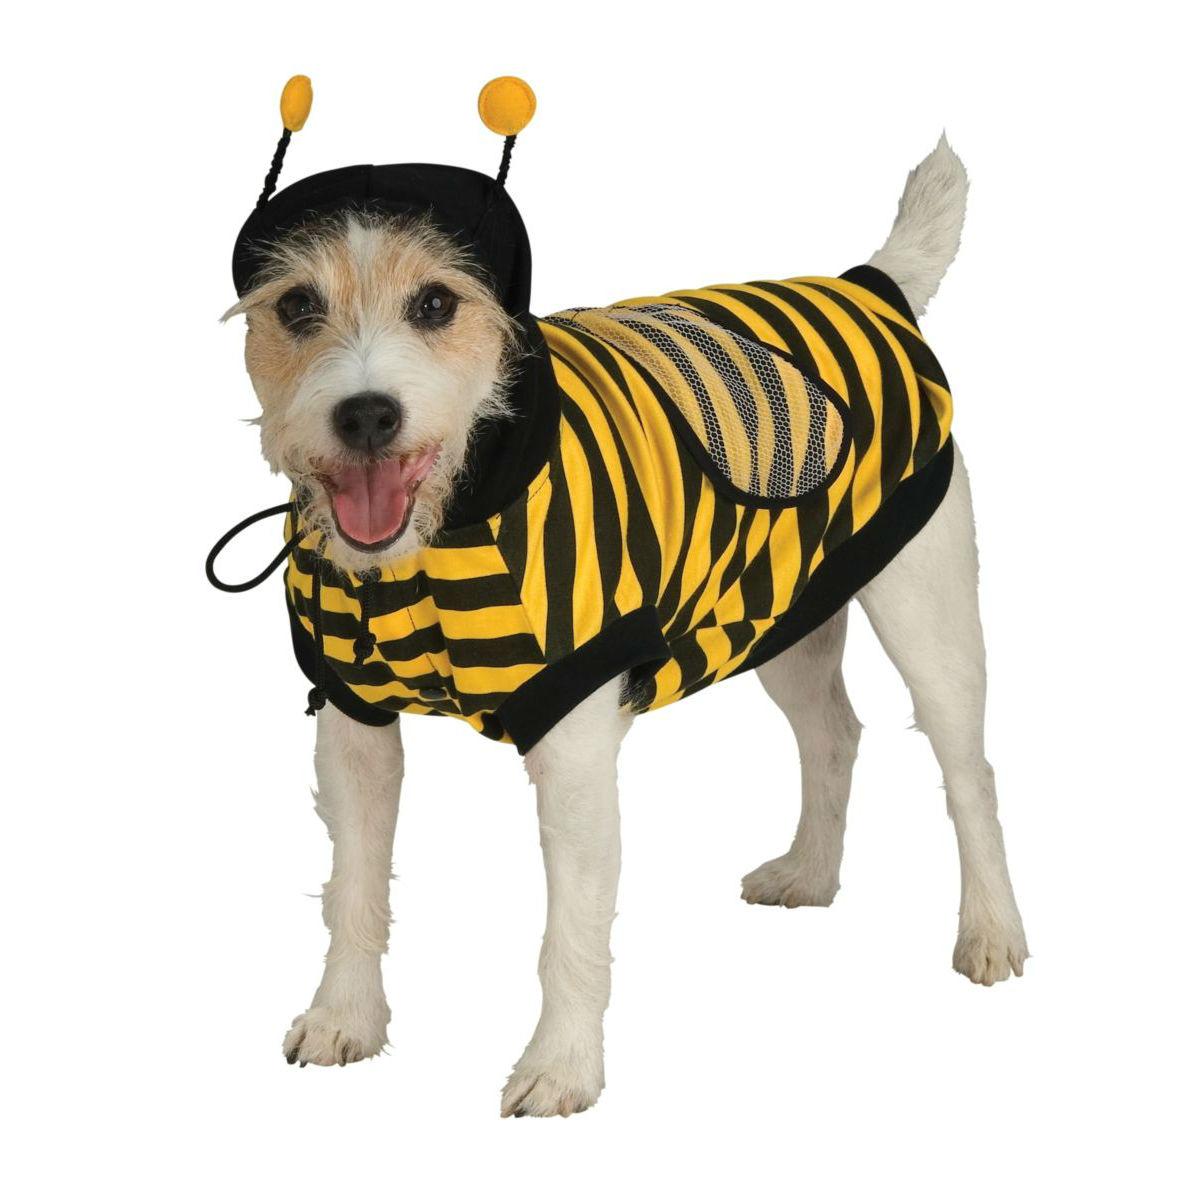 Bumble Bee Dog Costume by Rubies